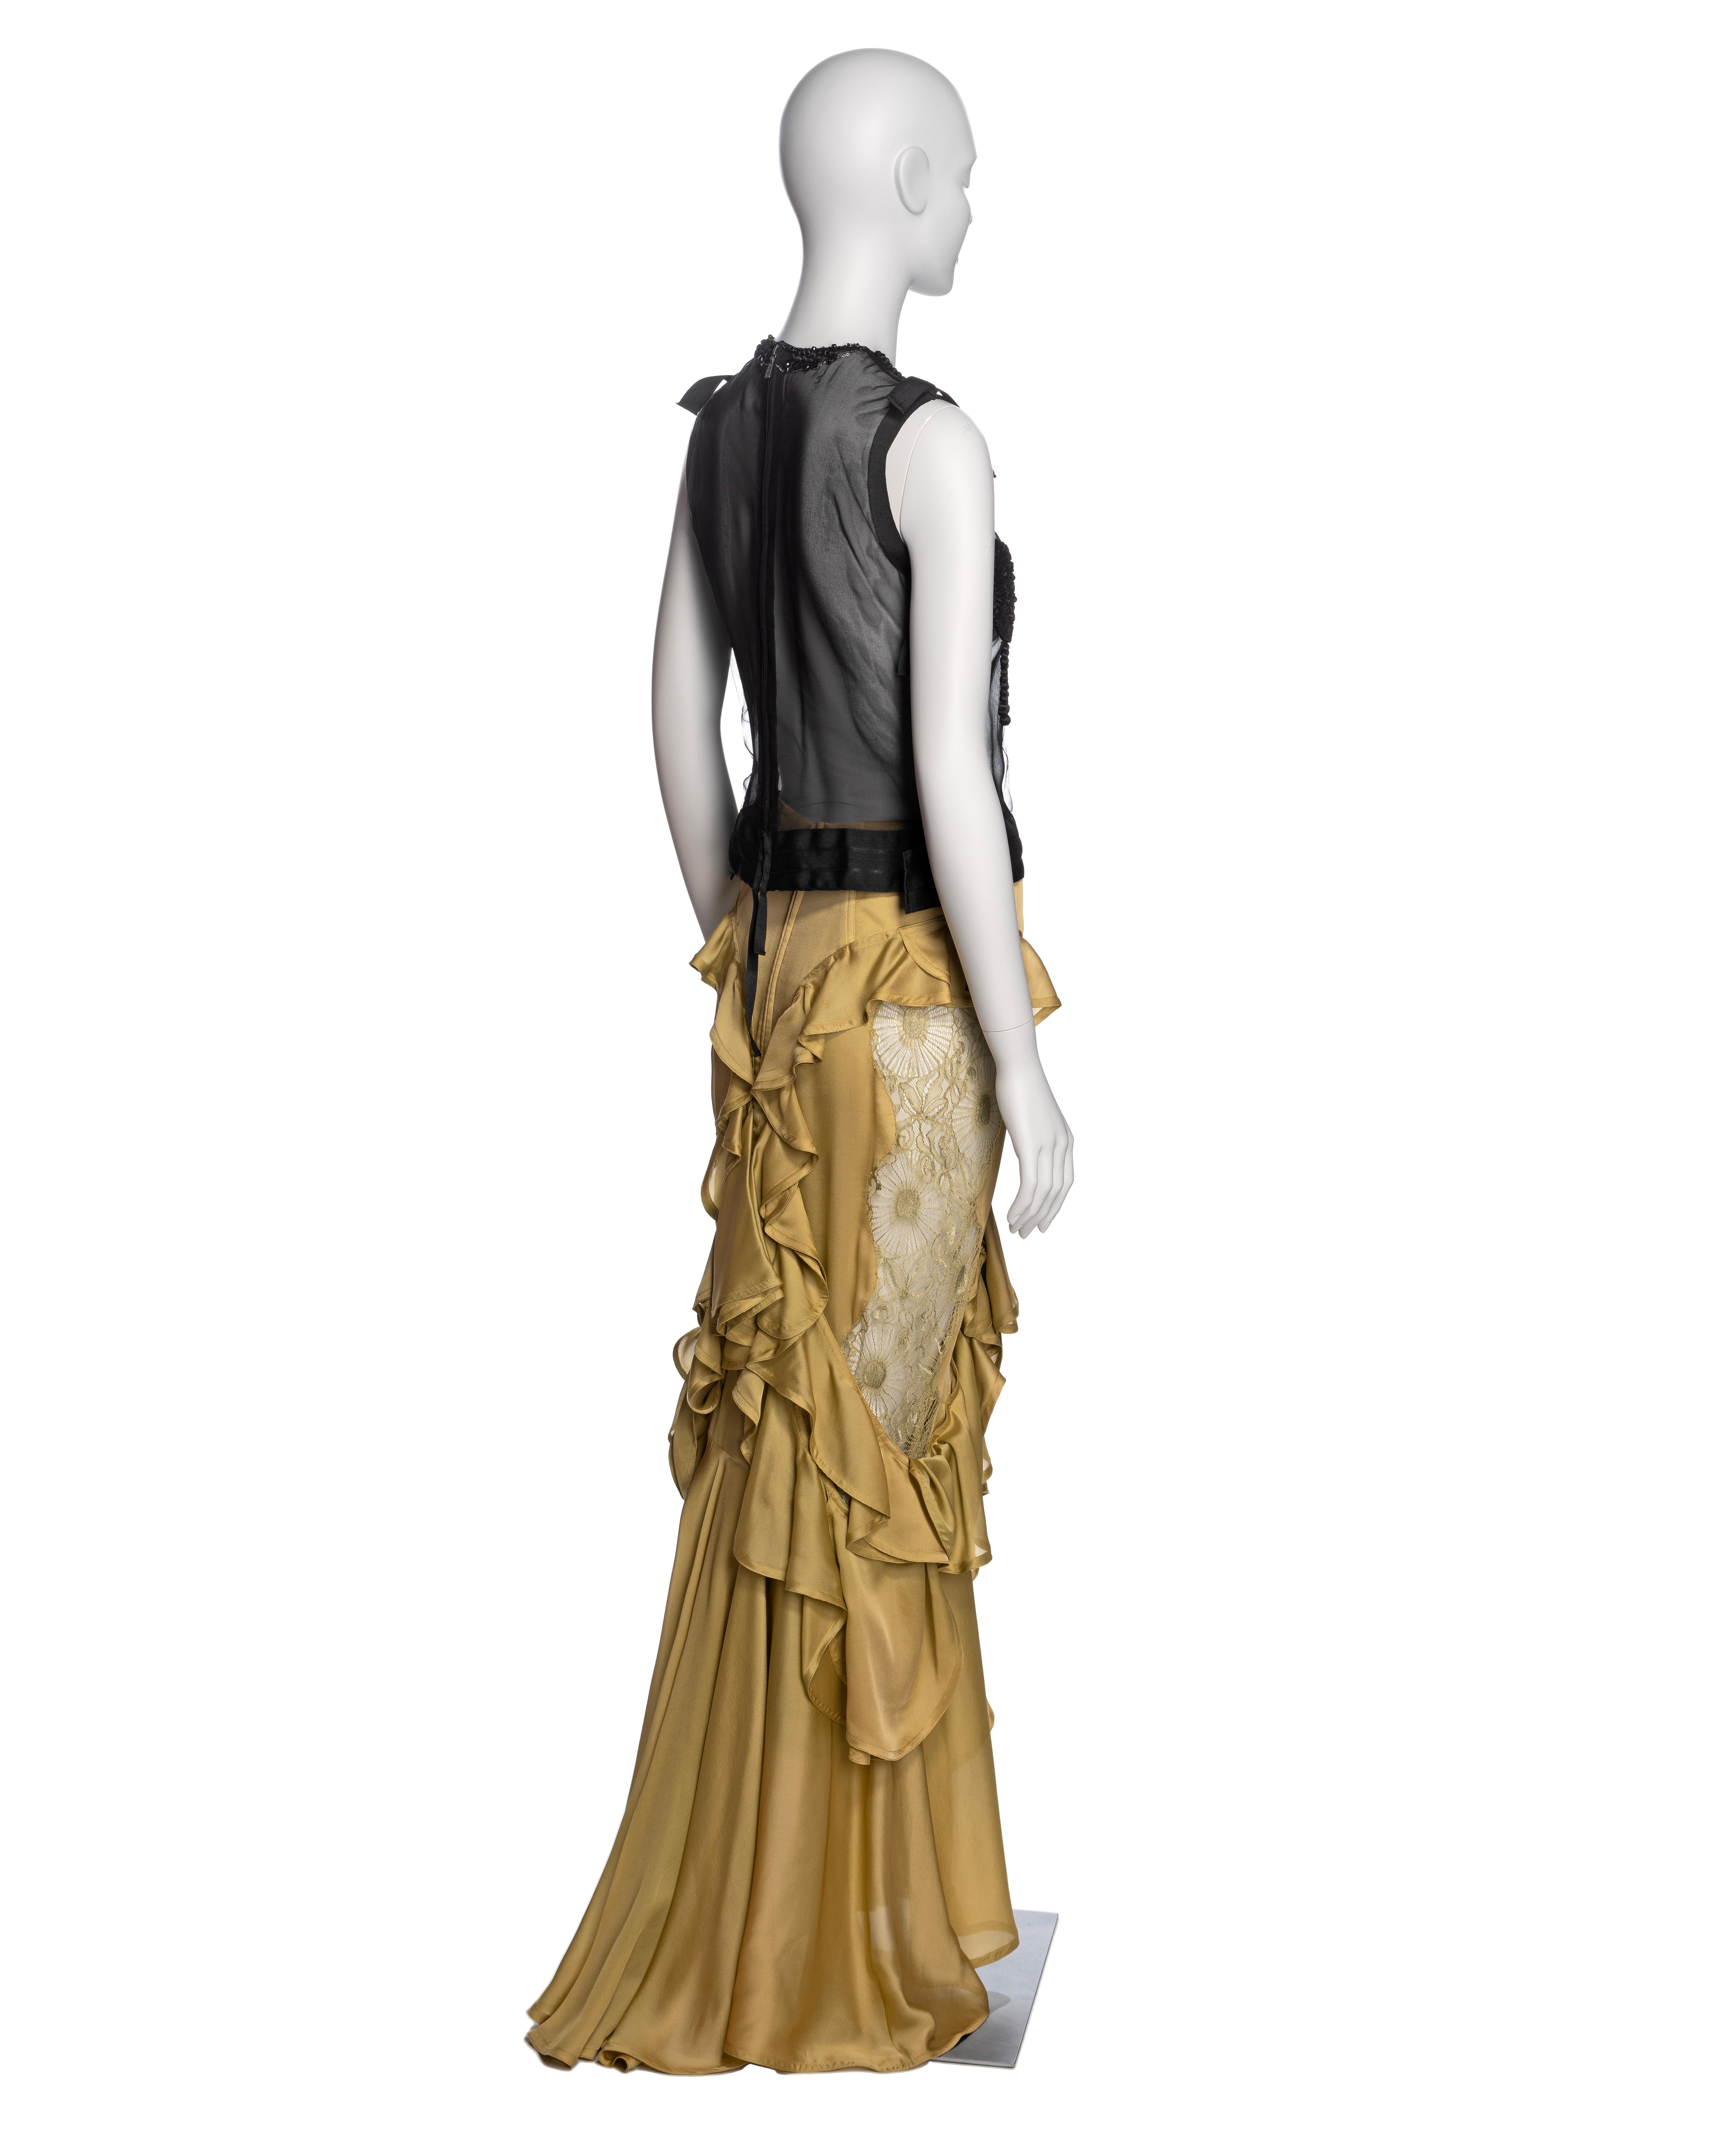 Yves Saint Laurent by Tom Ford Embellished Top and Silk Skirt Ensemble, FW 2003 For Sale 6